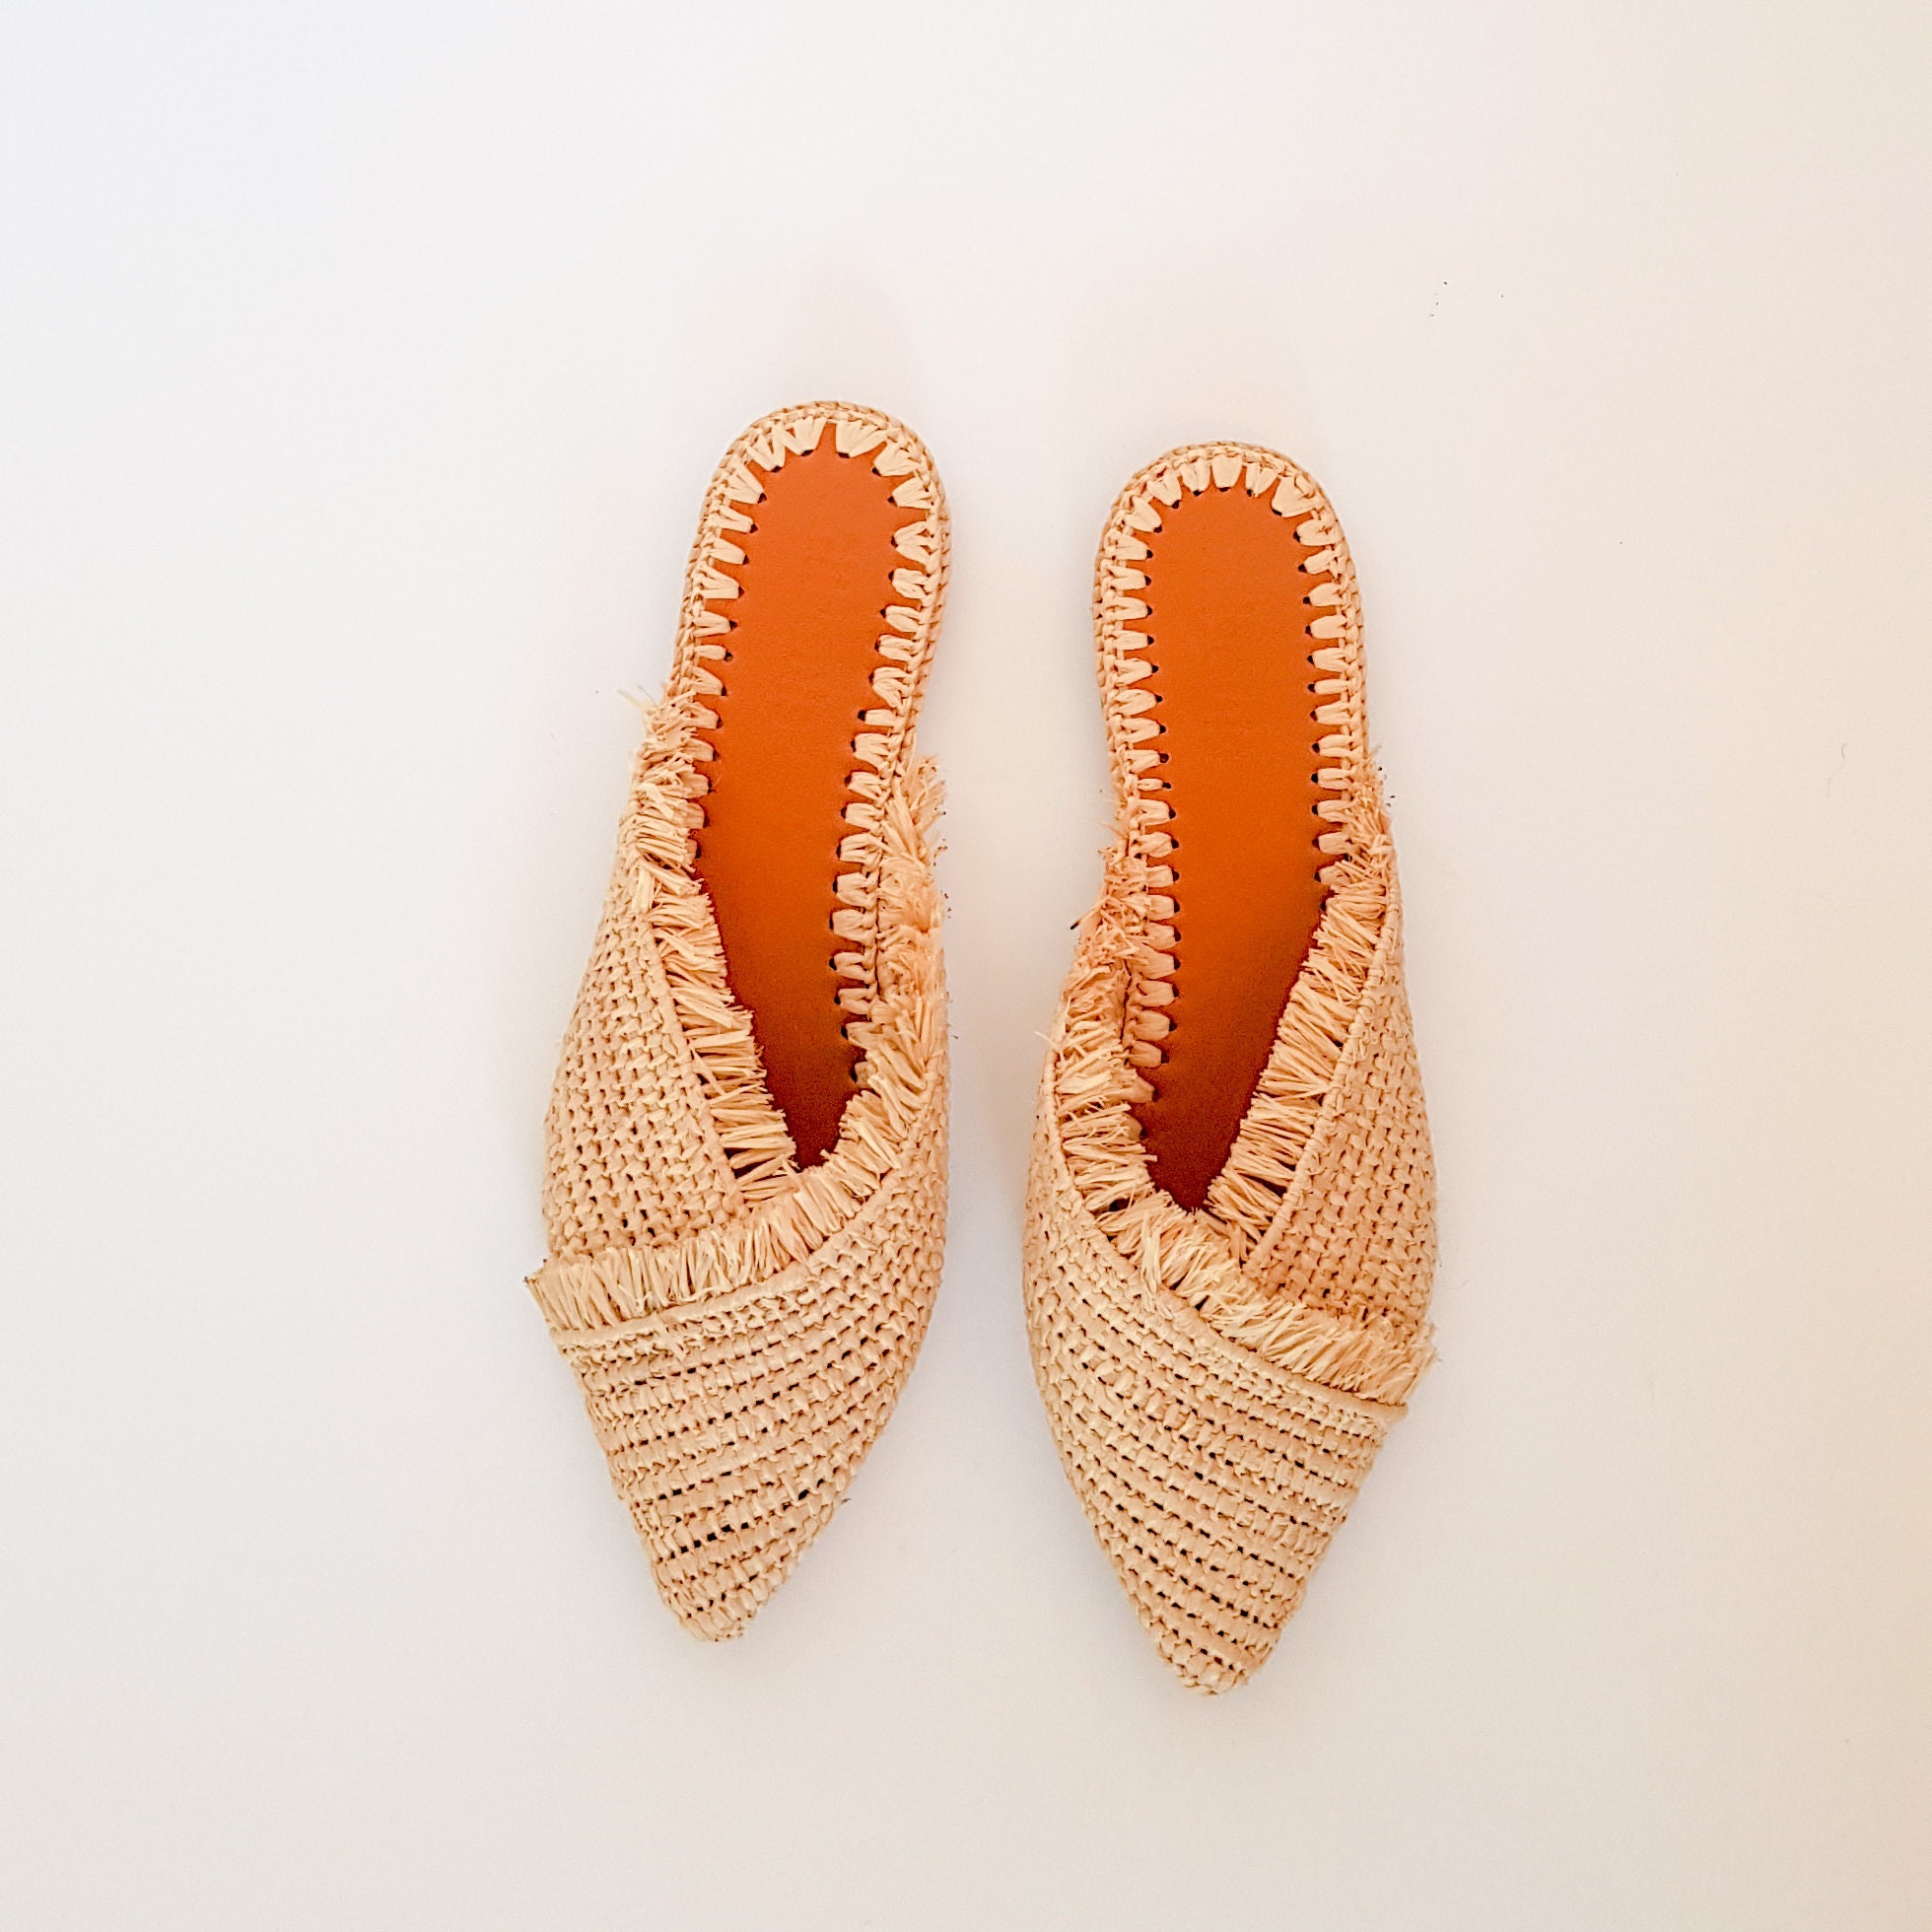 Raffia Shoes Handmade Slippers Natural Summer Mules - Etsy